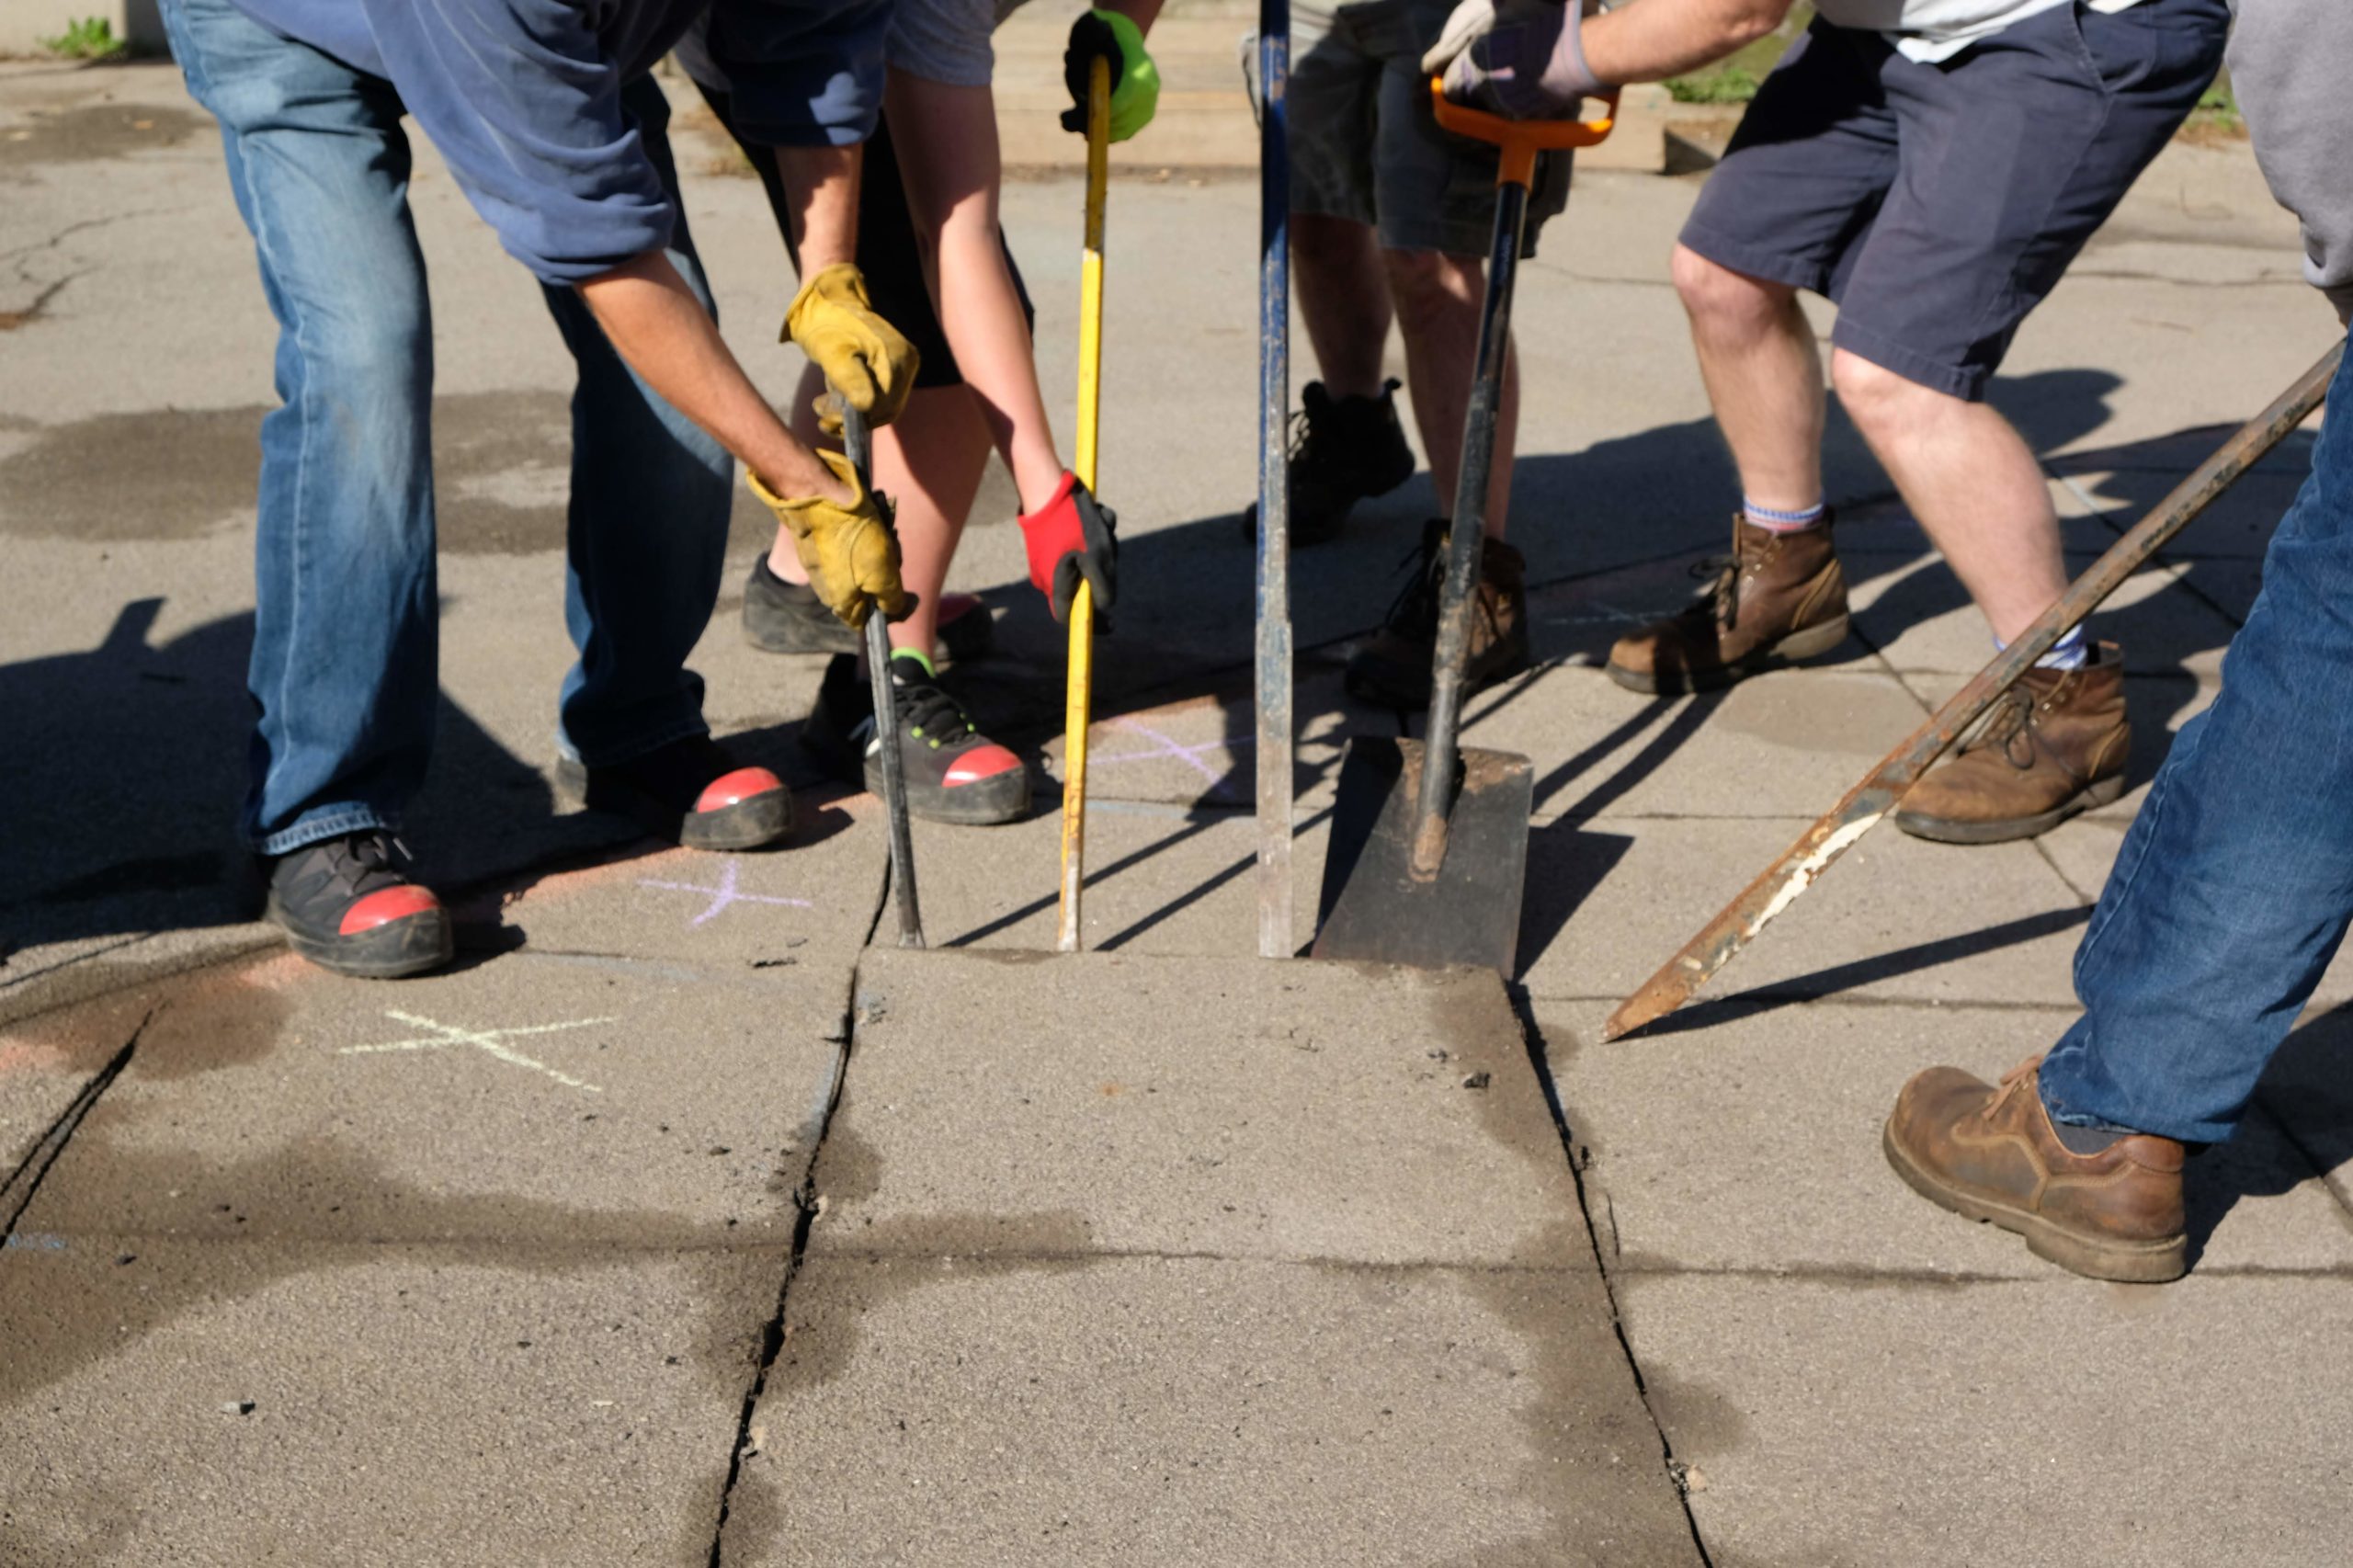 The legs and arms of five people holding shovels and tools work to lift a concrete paver out of the ground.